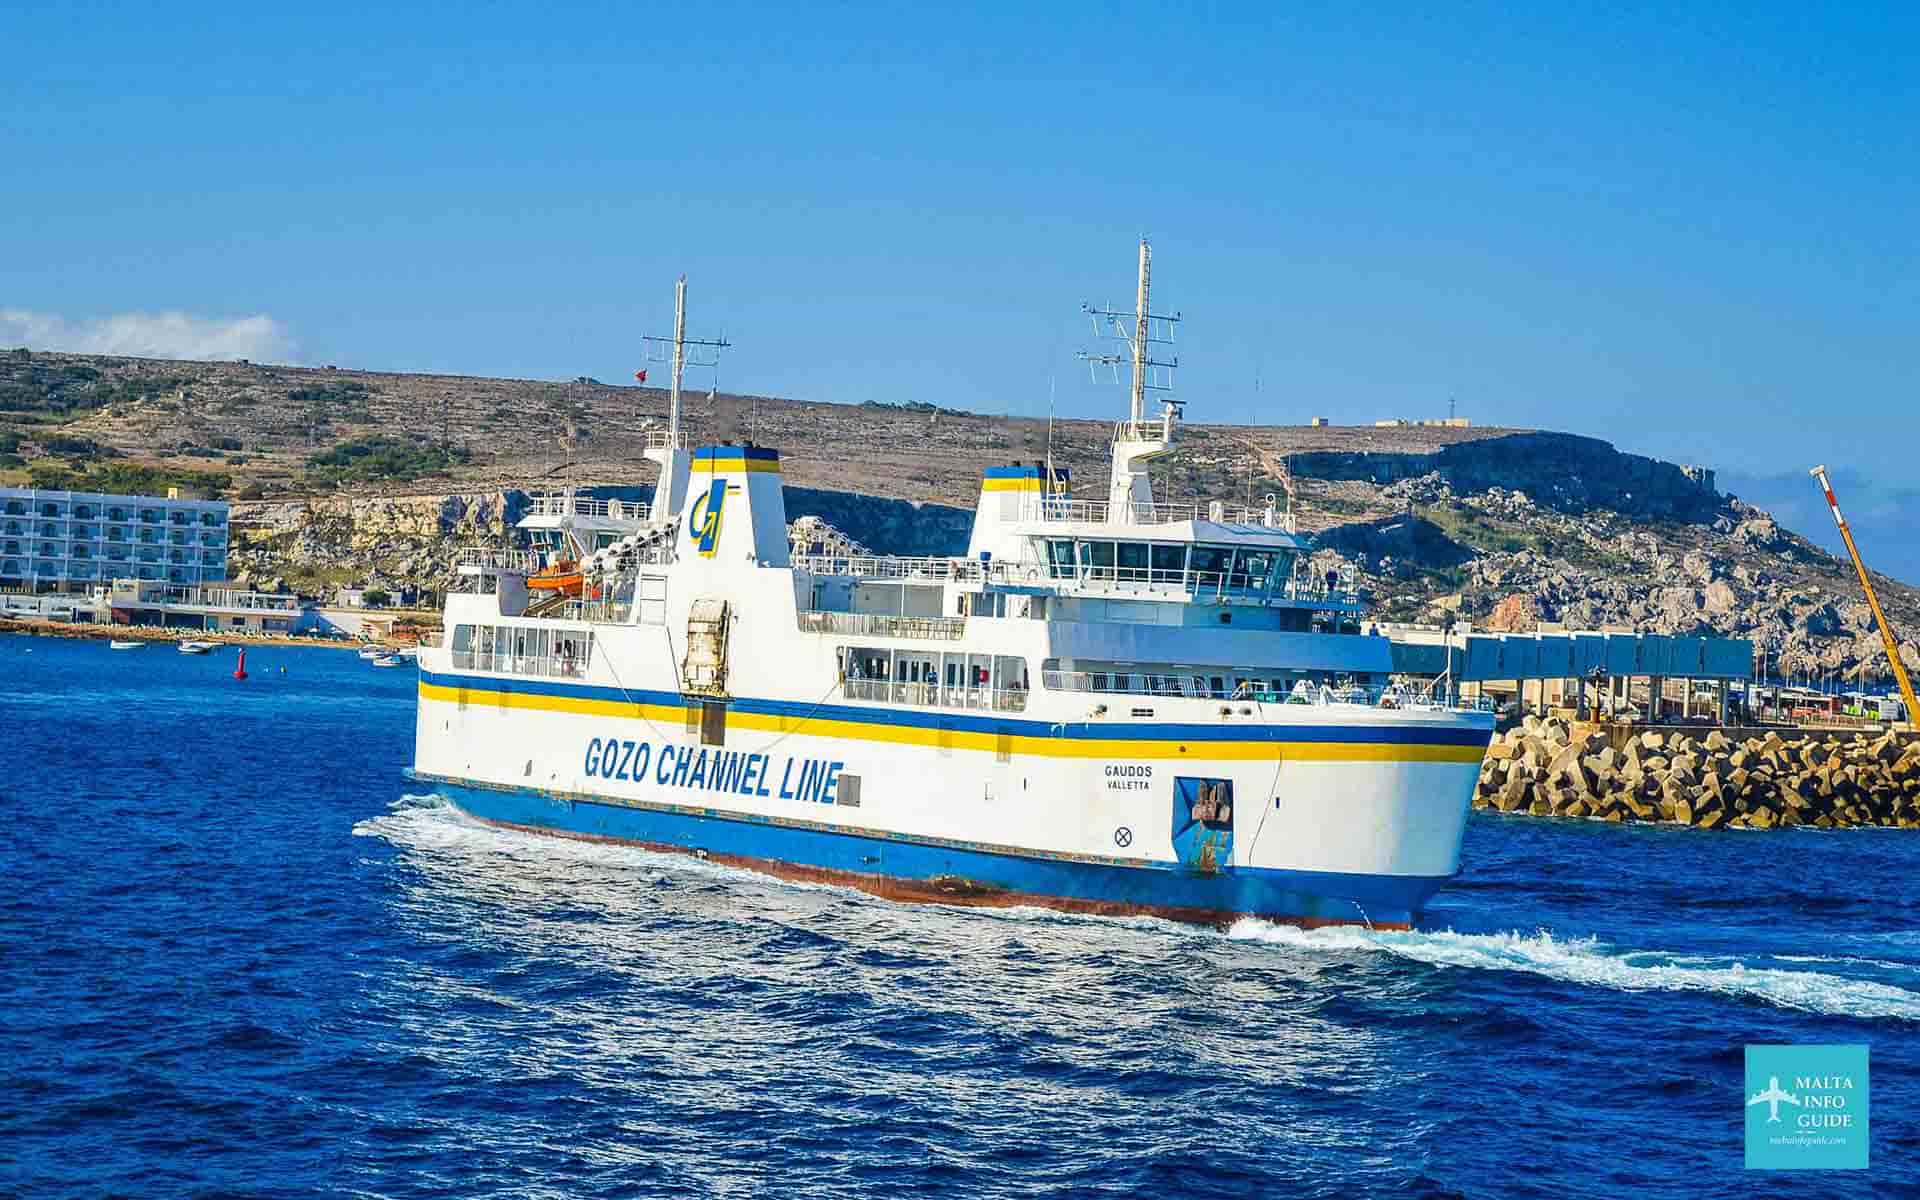 A Gozo Channel line arriving at the Cirkewwa ferry terminal in Malta.